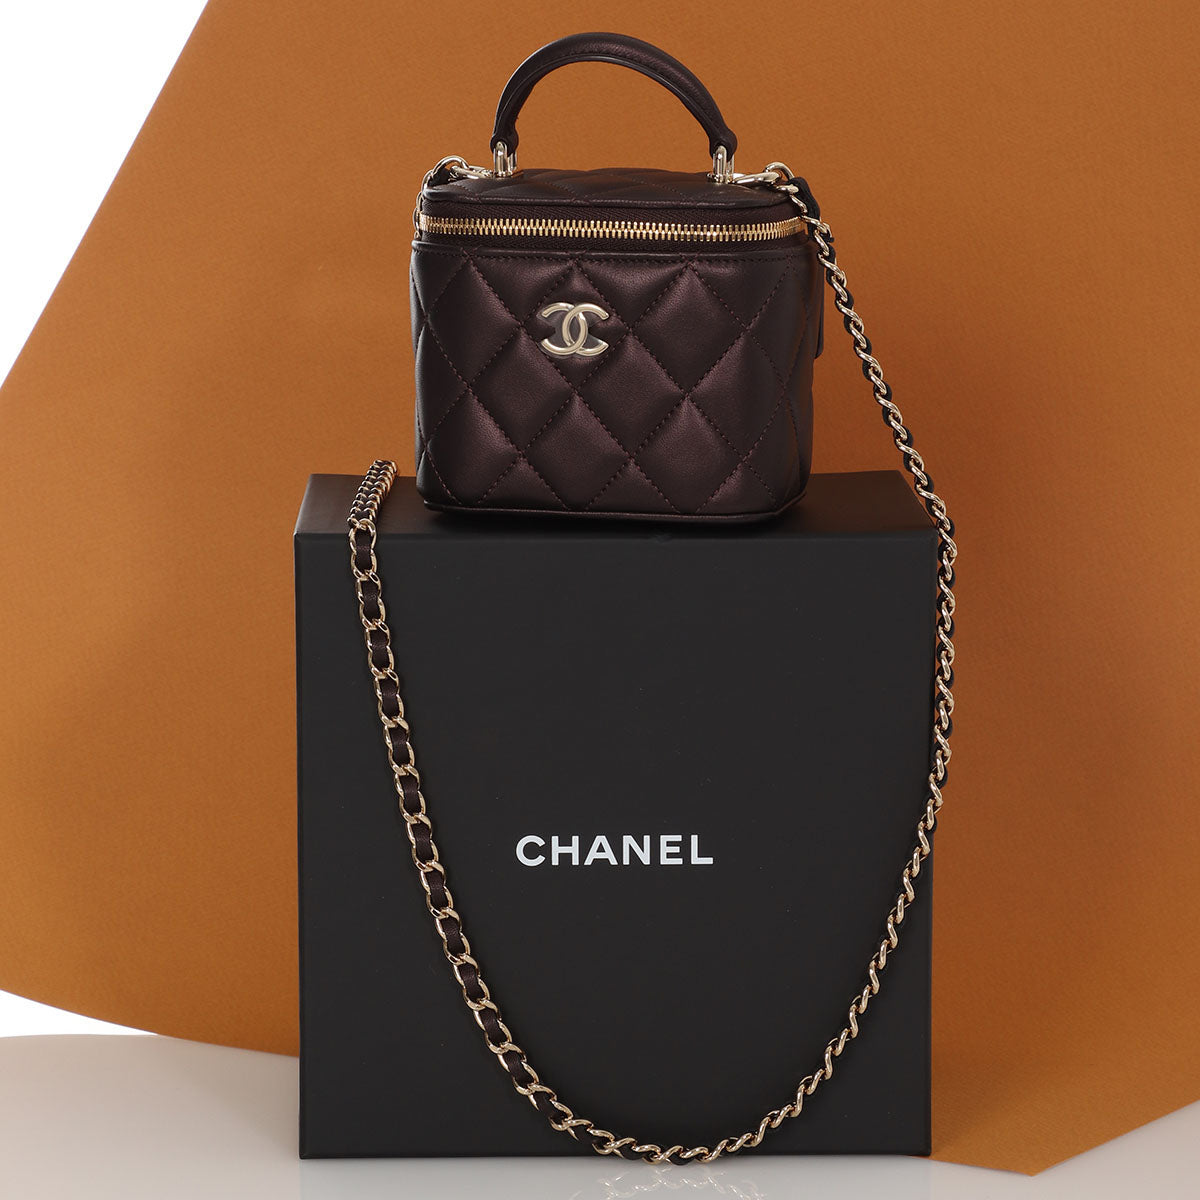 Chanel Mini in The Loop Quilted Leather Shoulder Bag